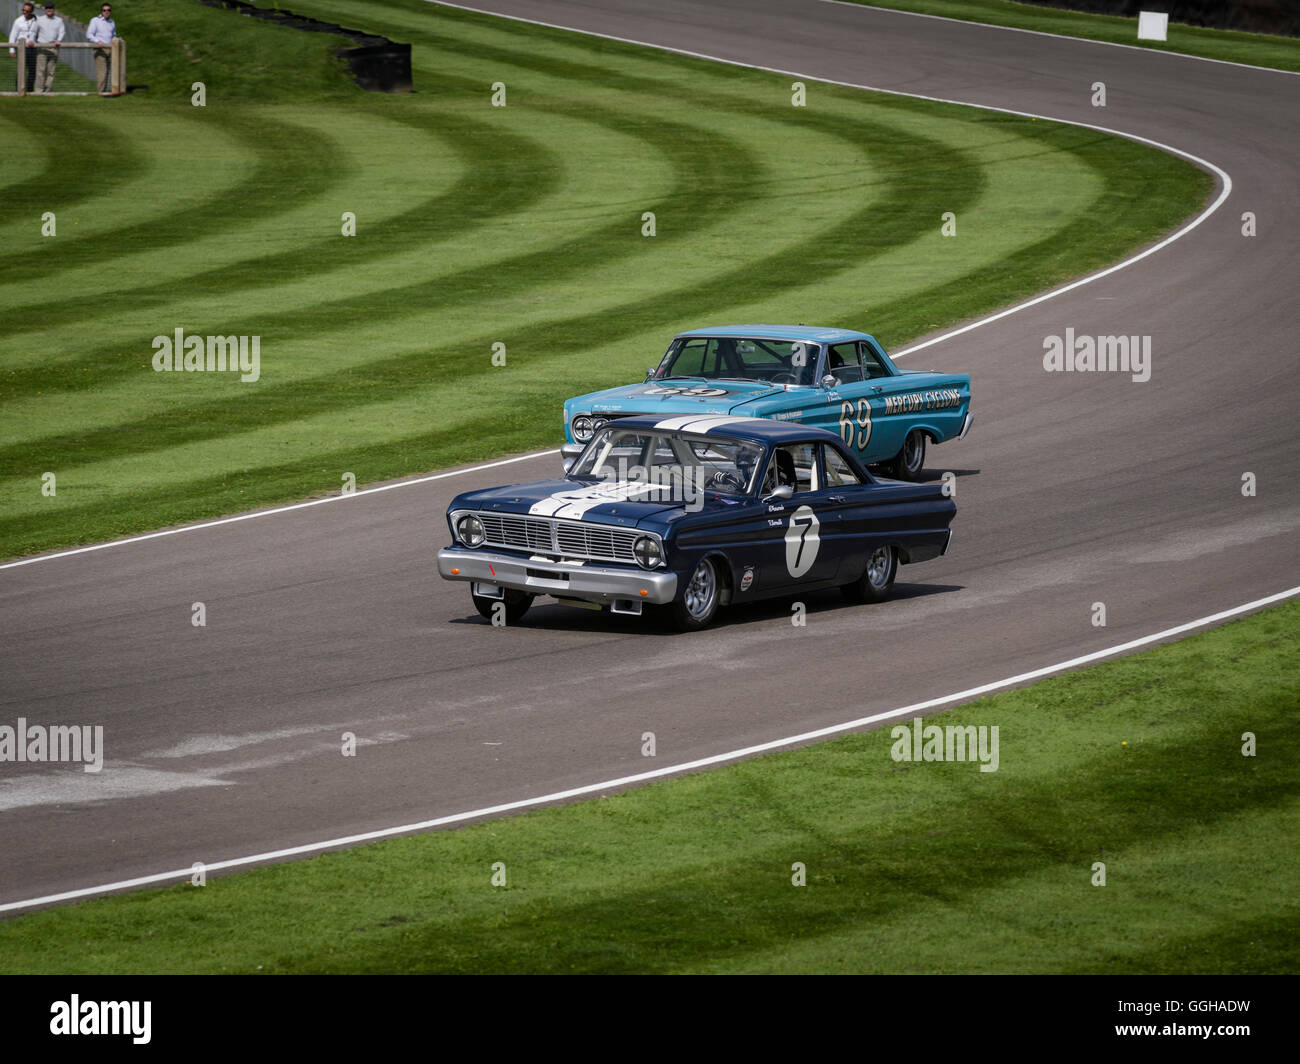 Ford Falcon, Sprint Cup Shelby, Goodwood Revival 2014, course Sport, voiture de collection, Goodwood, Chichester, Sussex, Angleterre, Grande B Banque D'Images